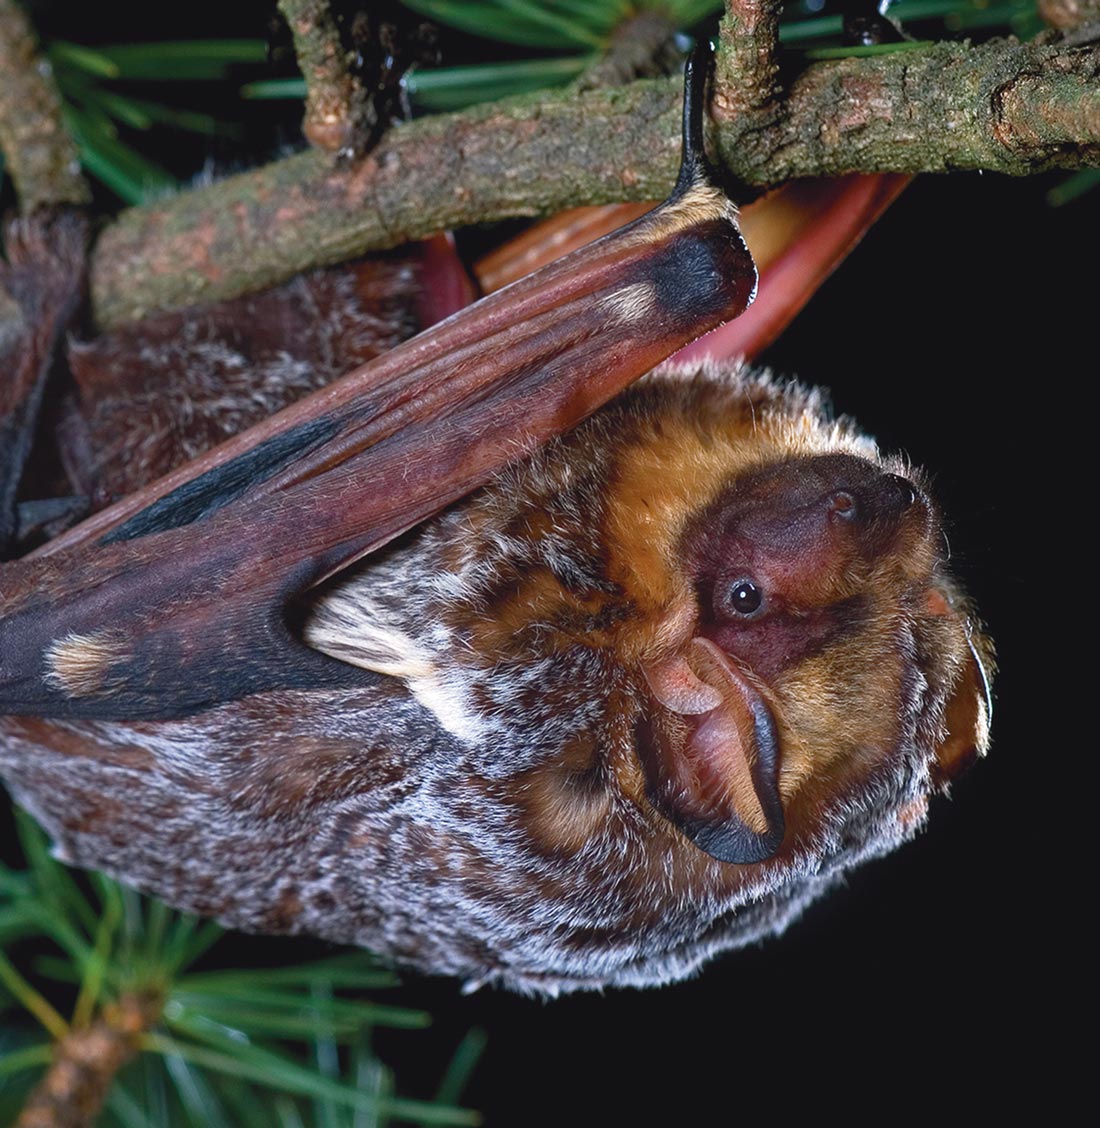 a Hoary bat hangs upside down from a tree branch with its front and back claws